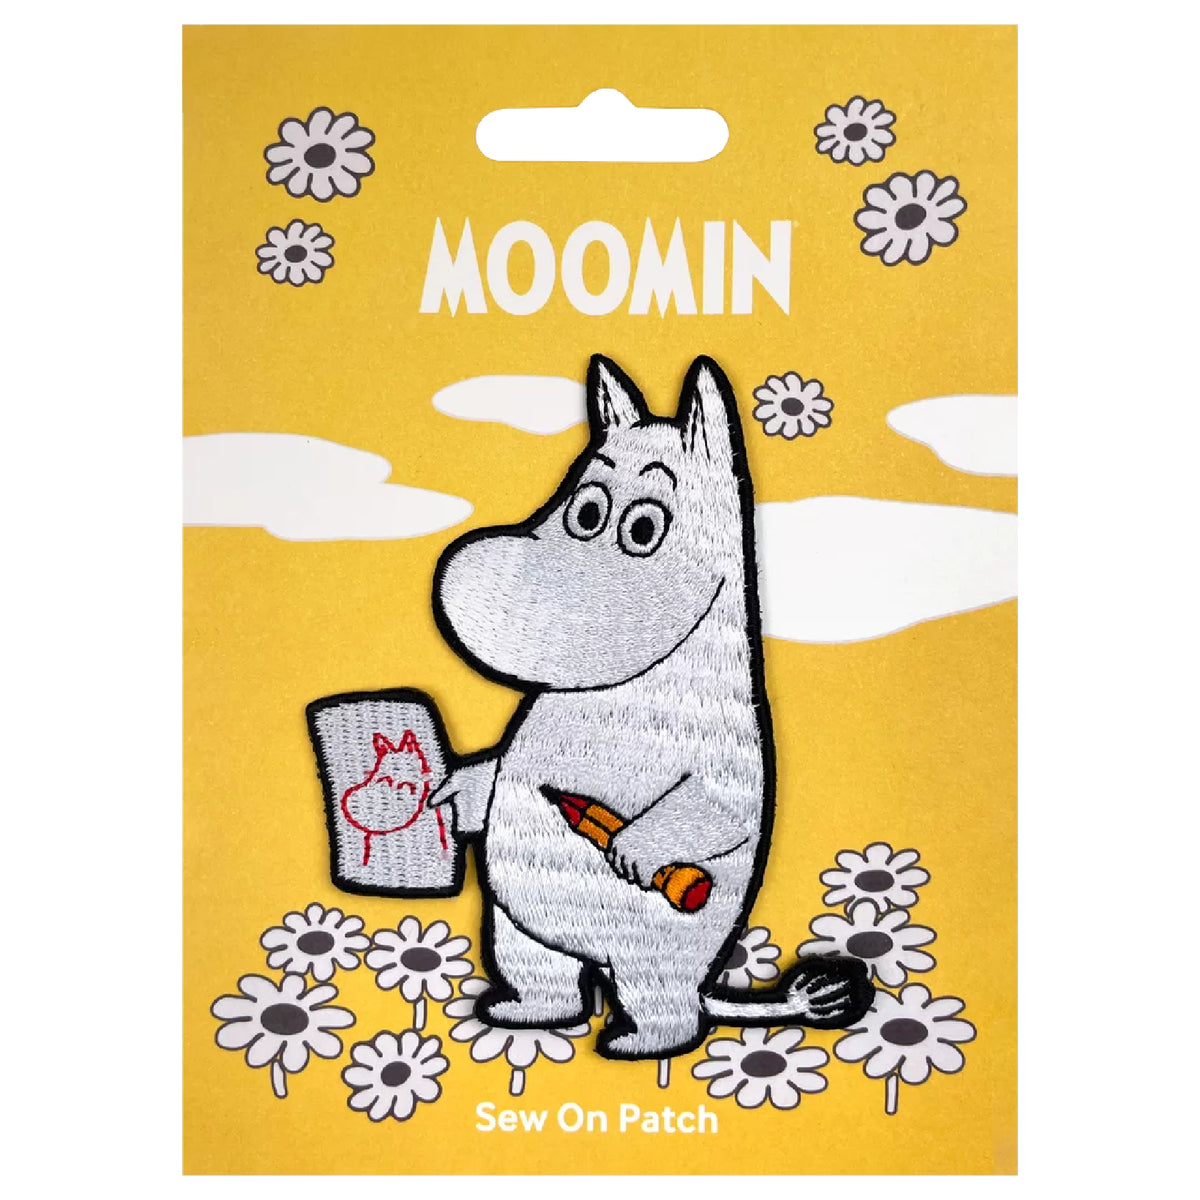 Moomintroll Drawing Sew On Patch